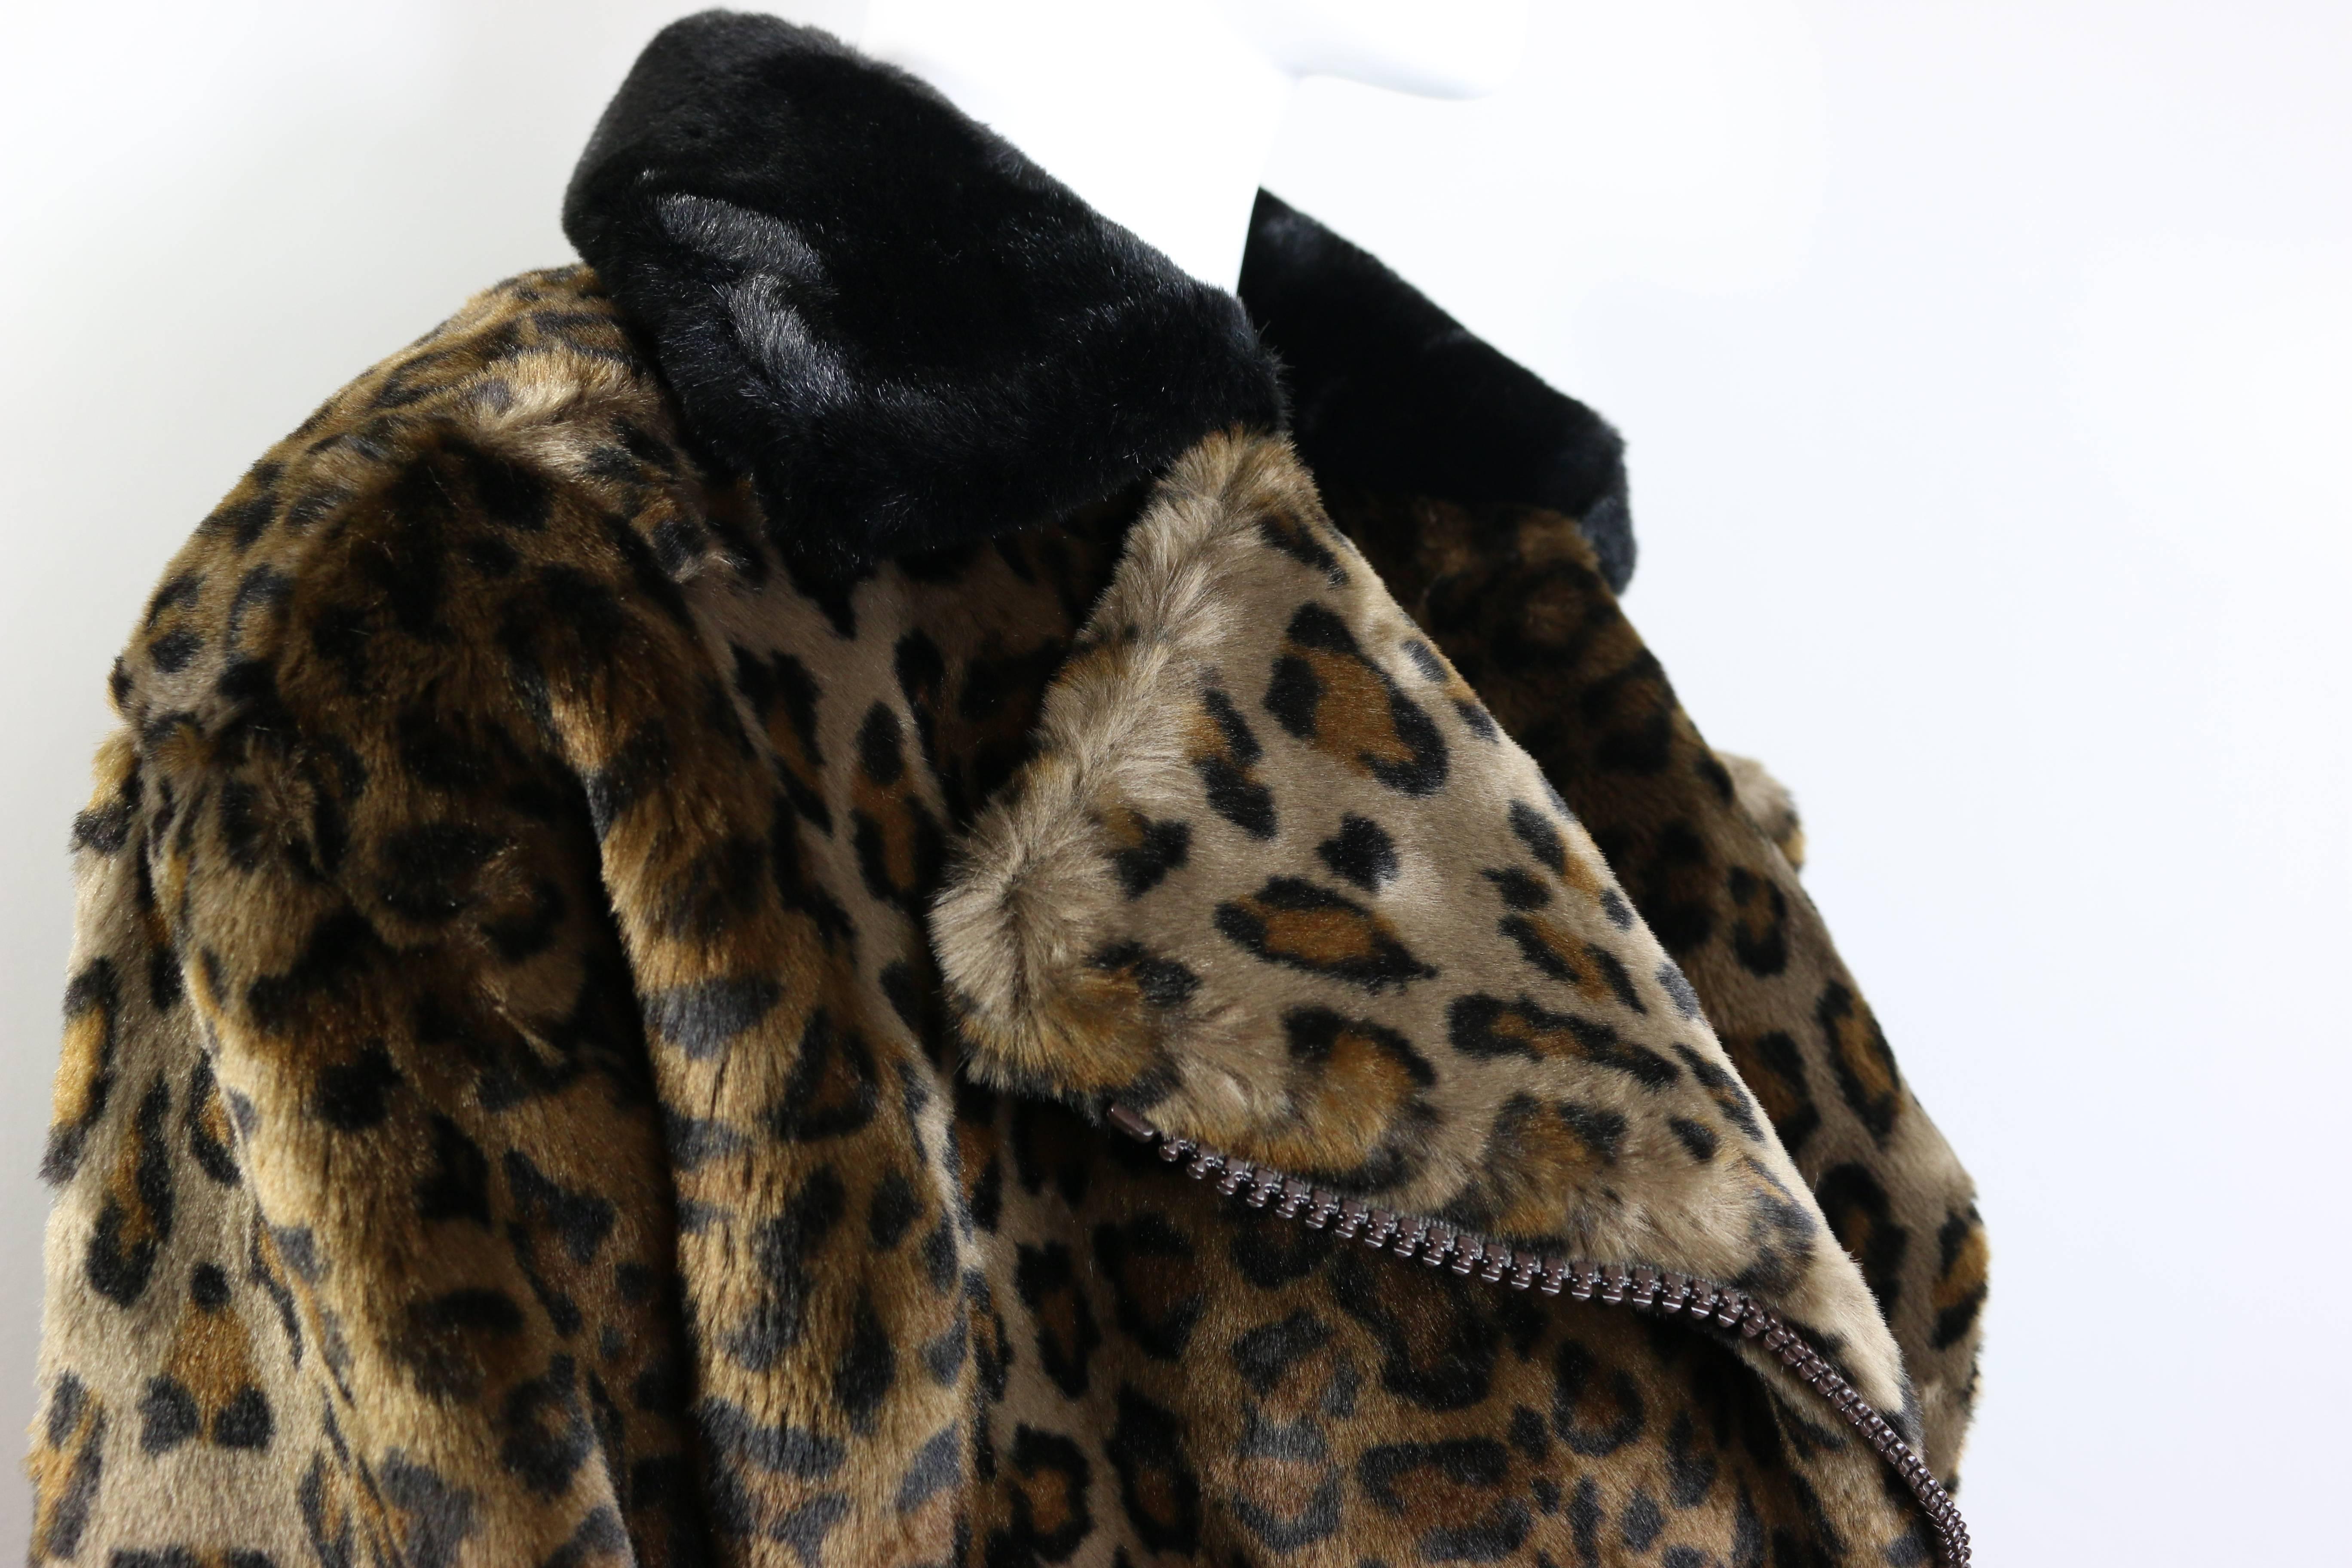 - Vintage 90s Nina Ricci animal leopard-print faux fur coat. 

- Featuring a diagonal zipper on front with black faux fur collar and folder cuffs. 

- 100 % Cotton, Rayon, Acrylic . 

- No size listed but it looks like a size M. 

- Height: